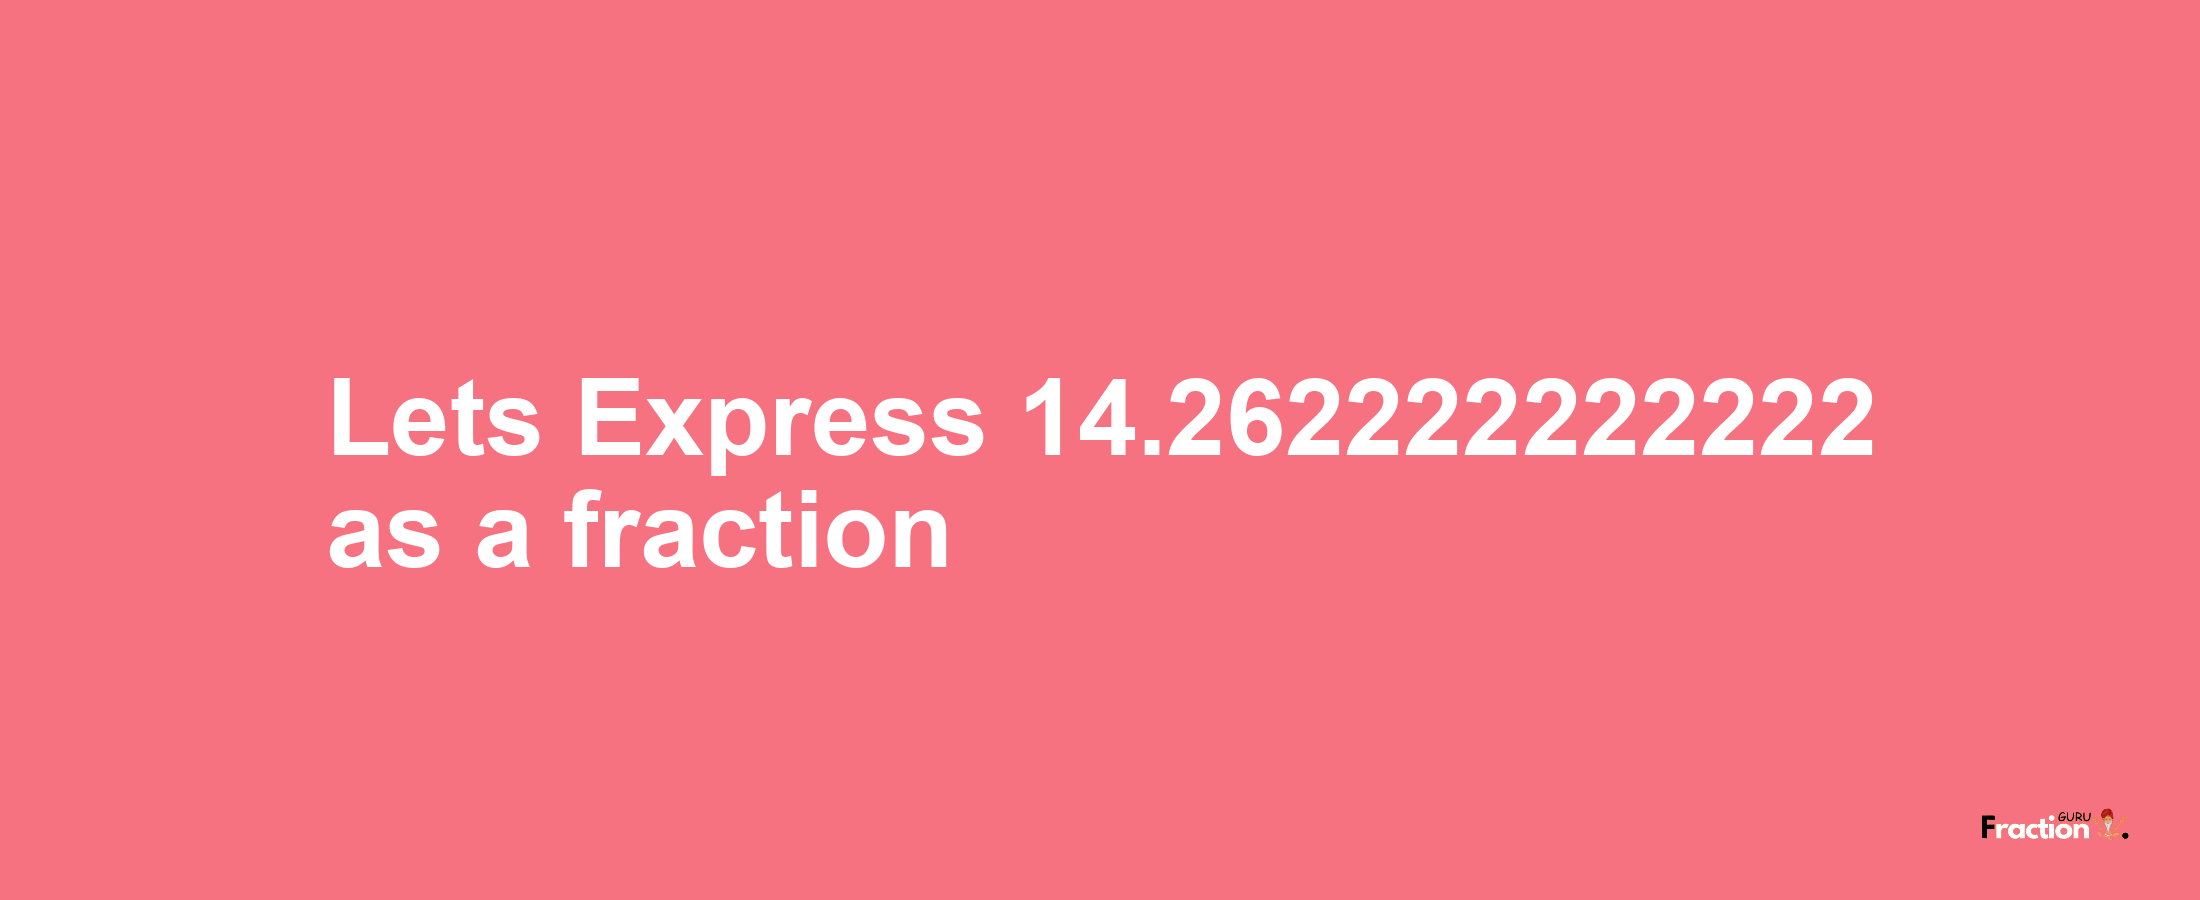 Lets Express 14.262222222222 as afraction